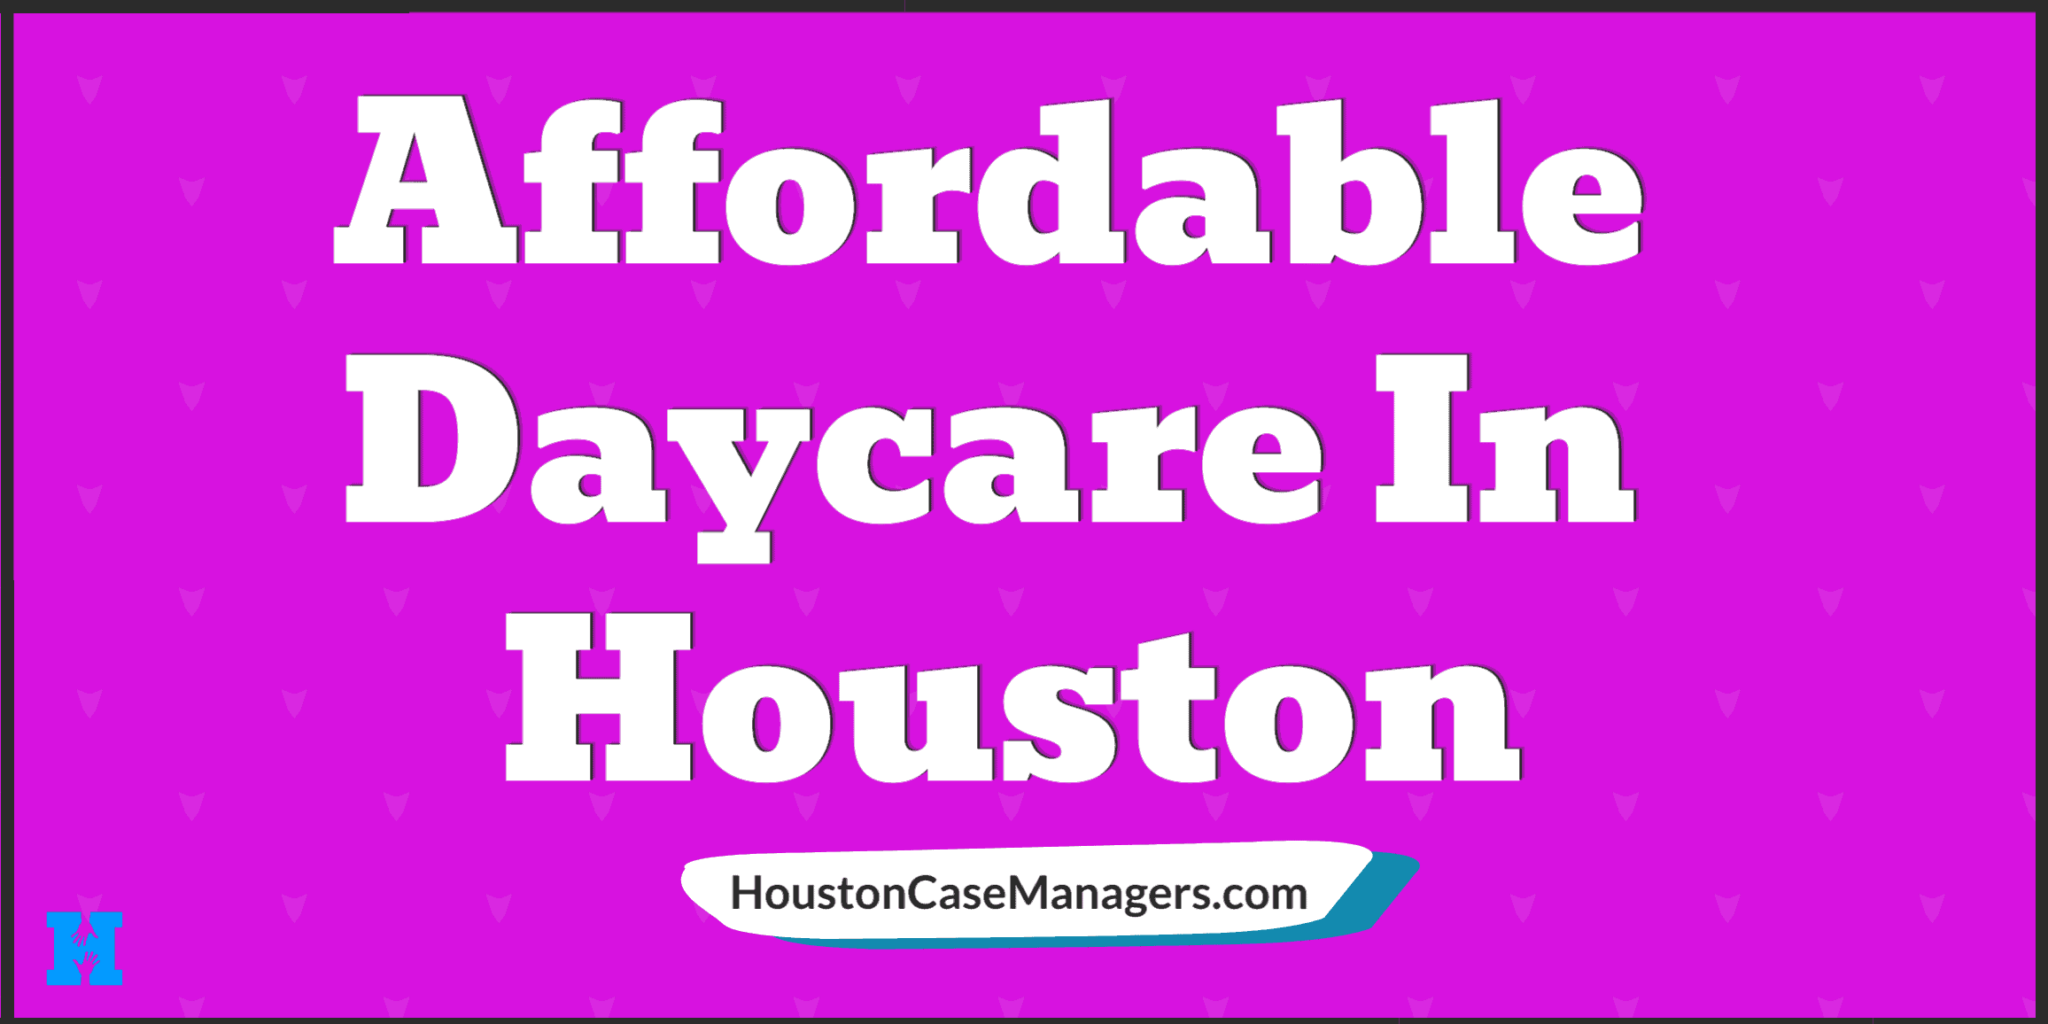 Affordable Daycare Houston 1 2048x1024 